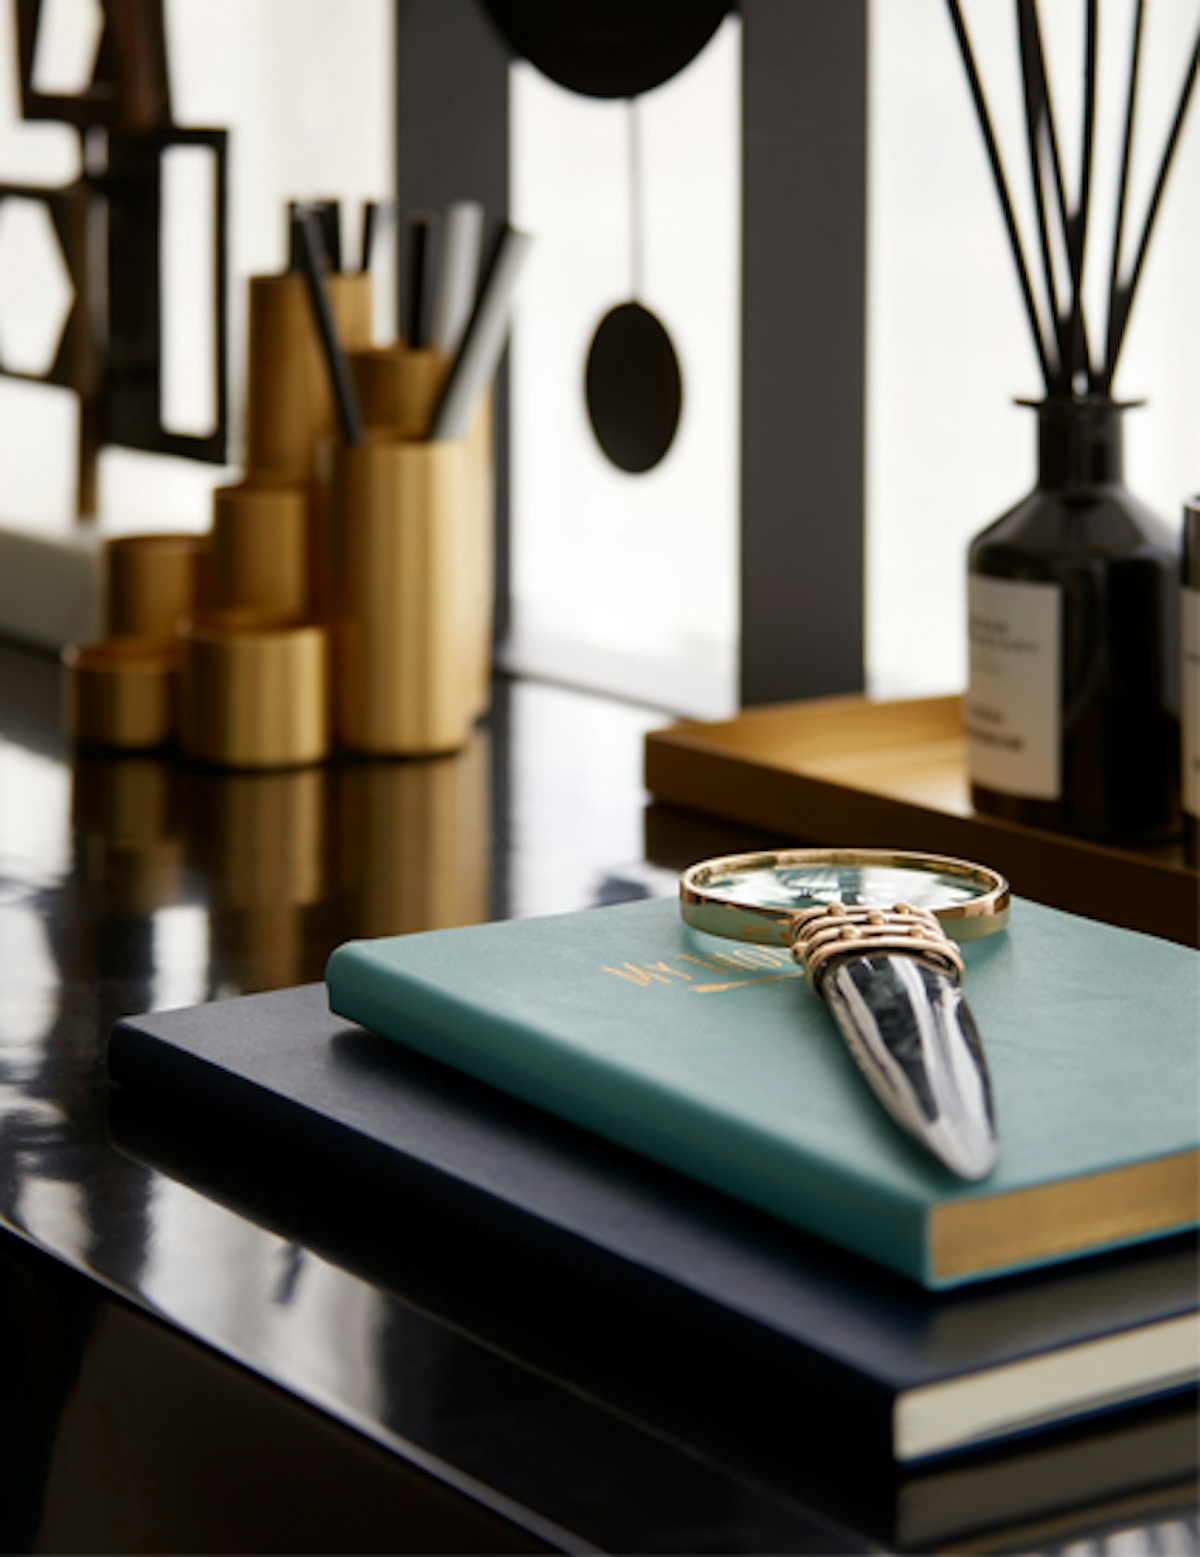 How To Declutter Your Home | Desk Organisation by Elicyon | Read more in the LuxDeco.com Style Guide